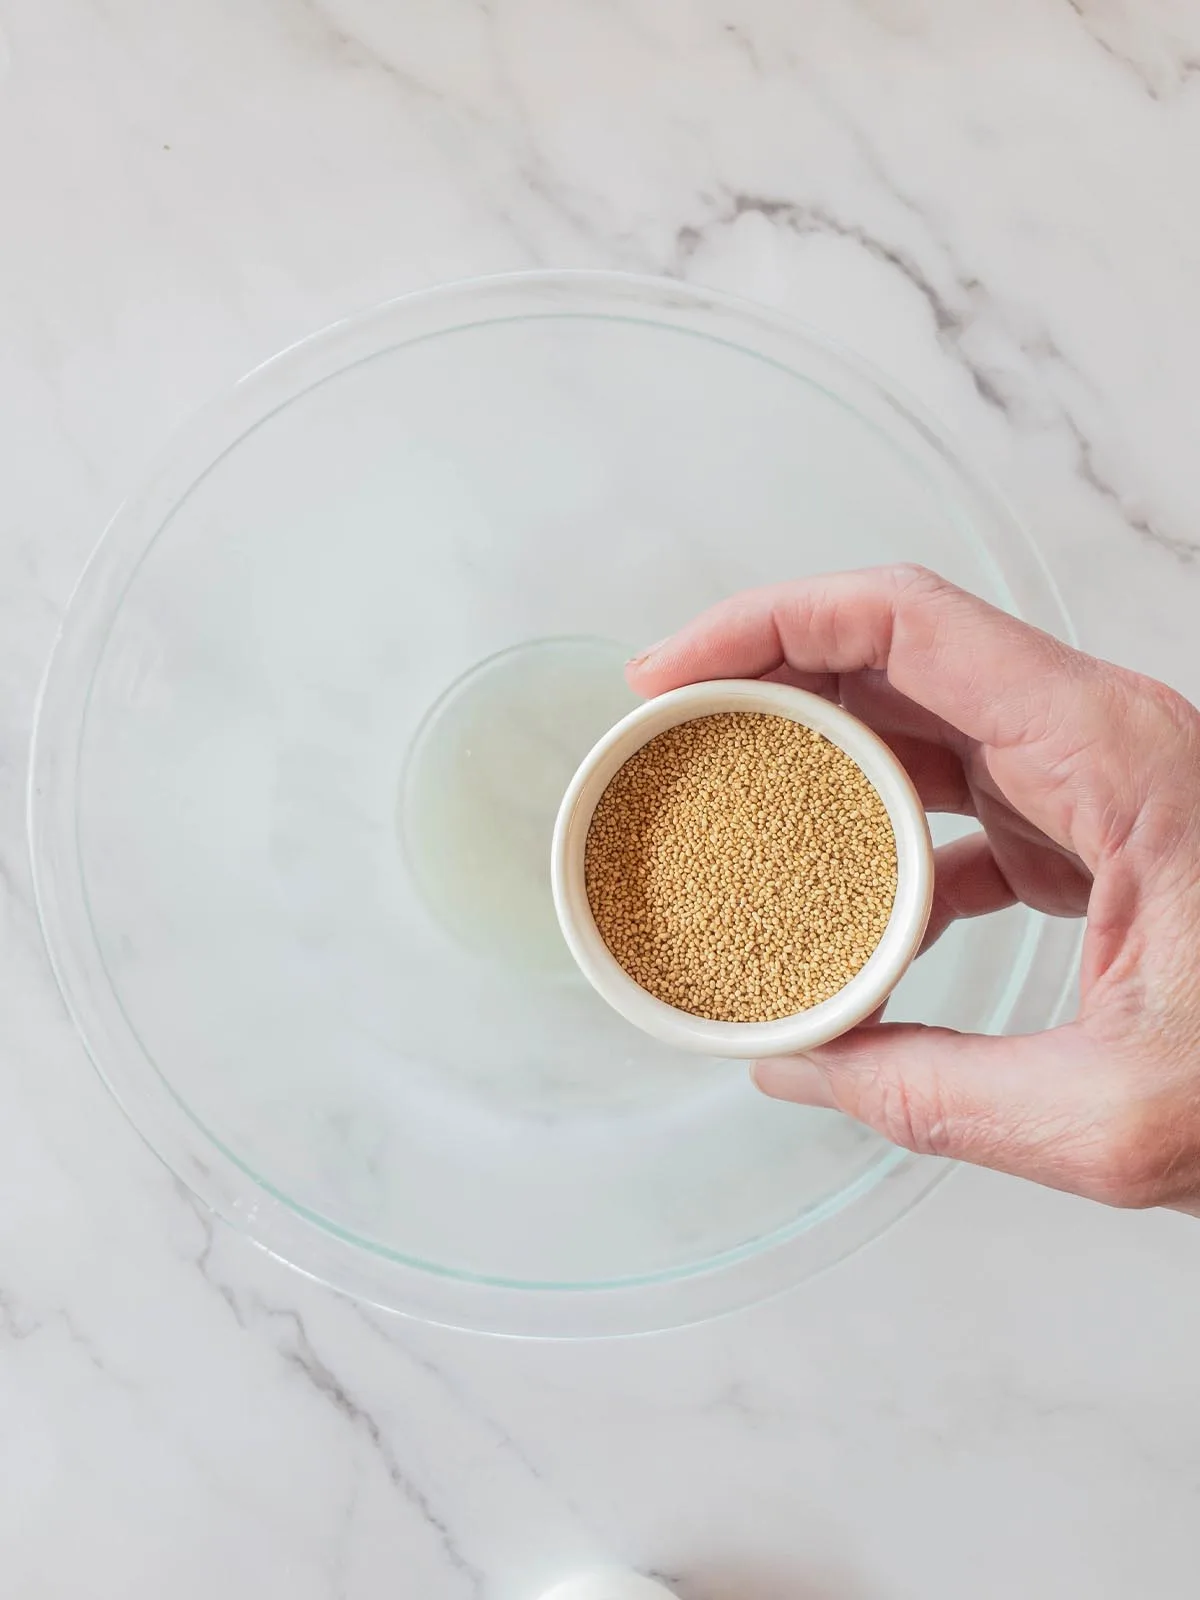 A hand holding a bowl of dry yeast, ready to add to warm water.